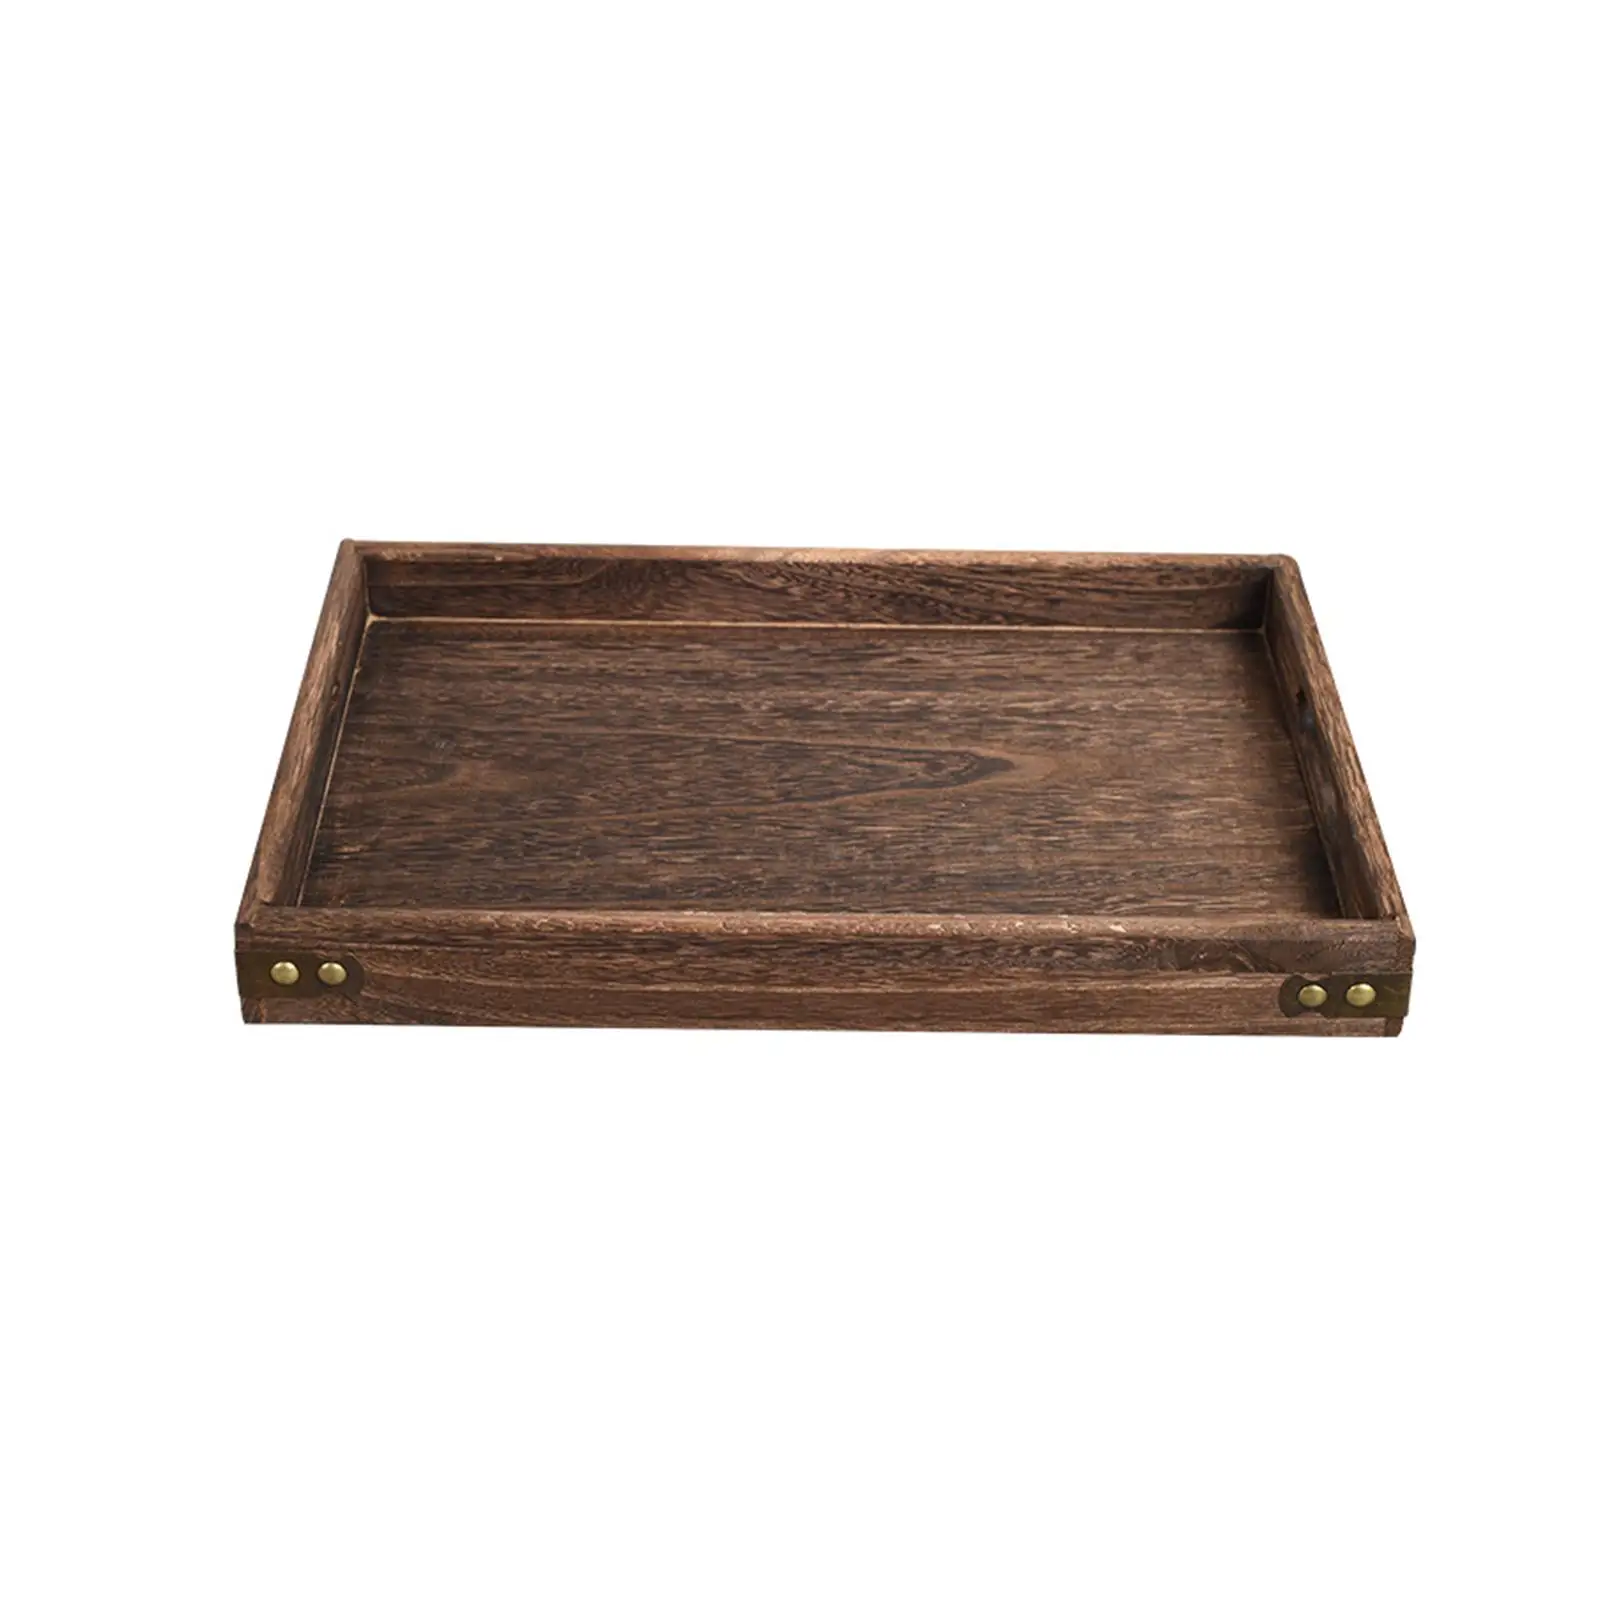 Rustic Wood Serving Tray Platter Ottoman Tray Food Trays Convenient for Serving Drinks Multifunctional Durable